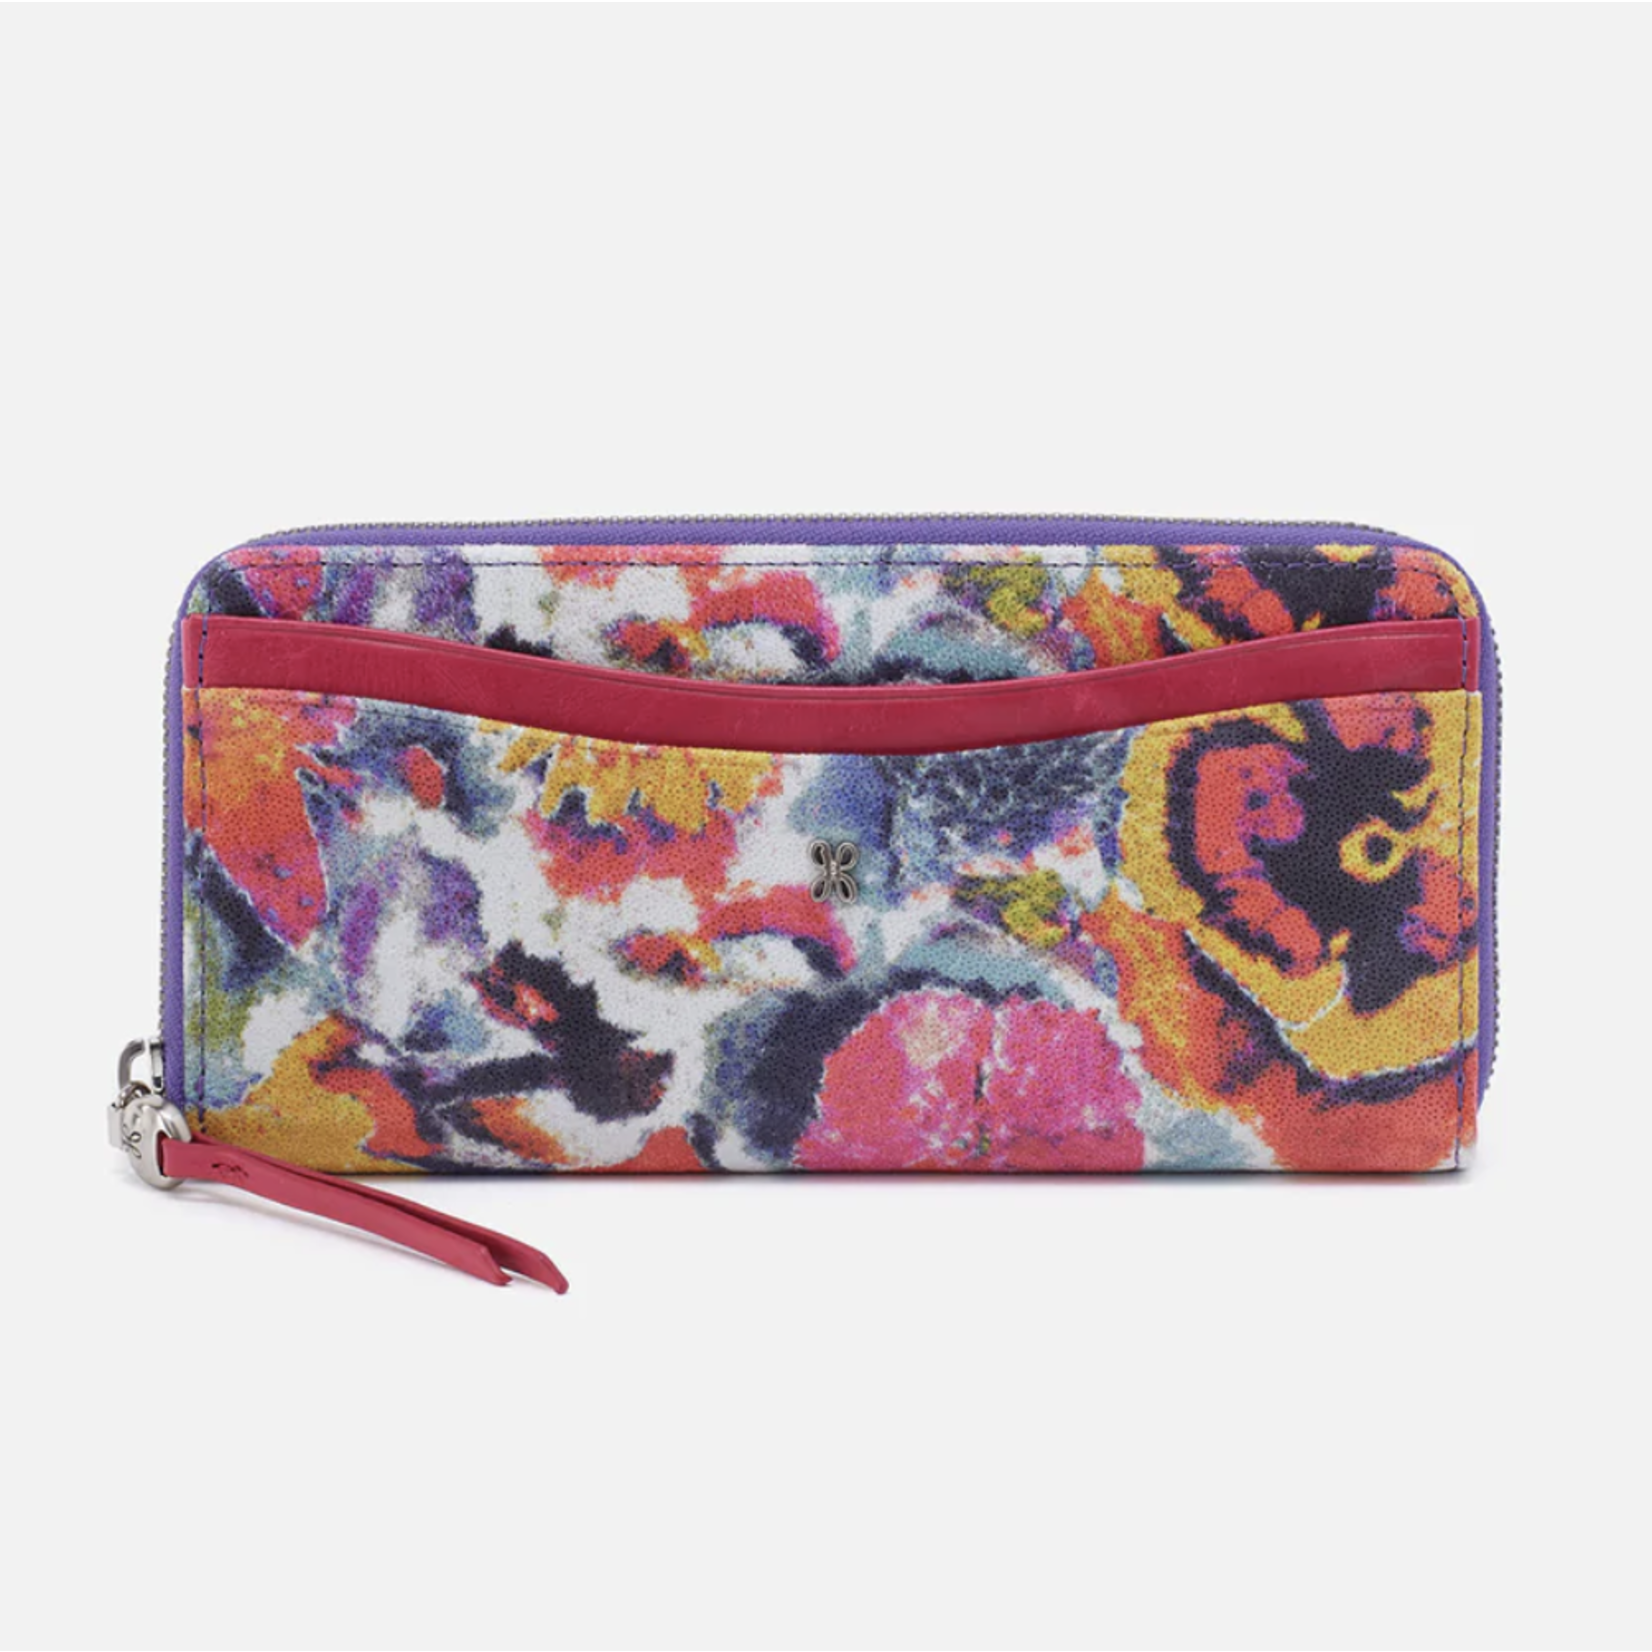 HOBO HOBO Max Zip Around Continental Wallet Poppy Floral Printed Leather